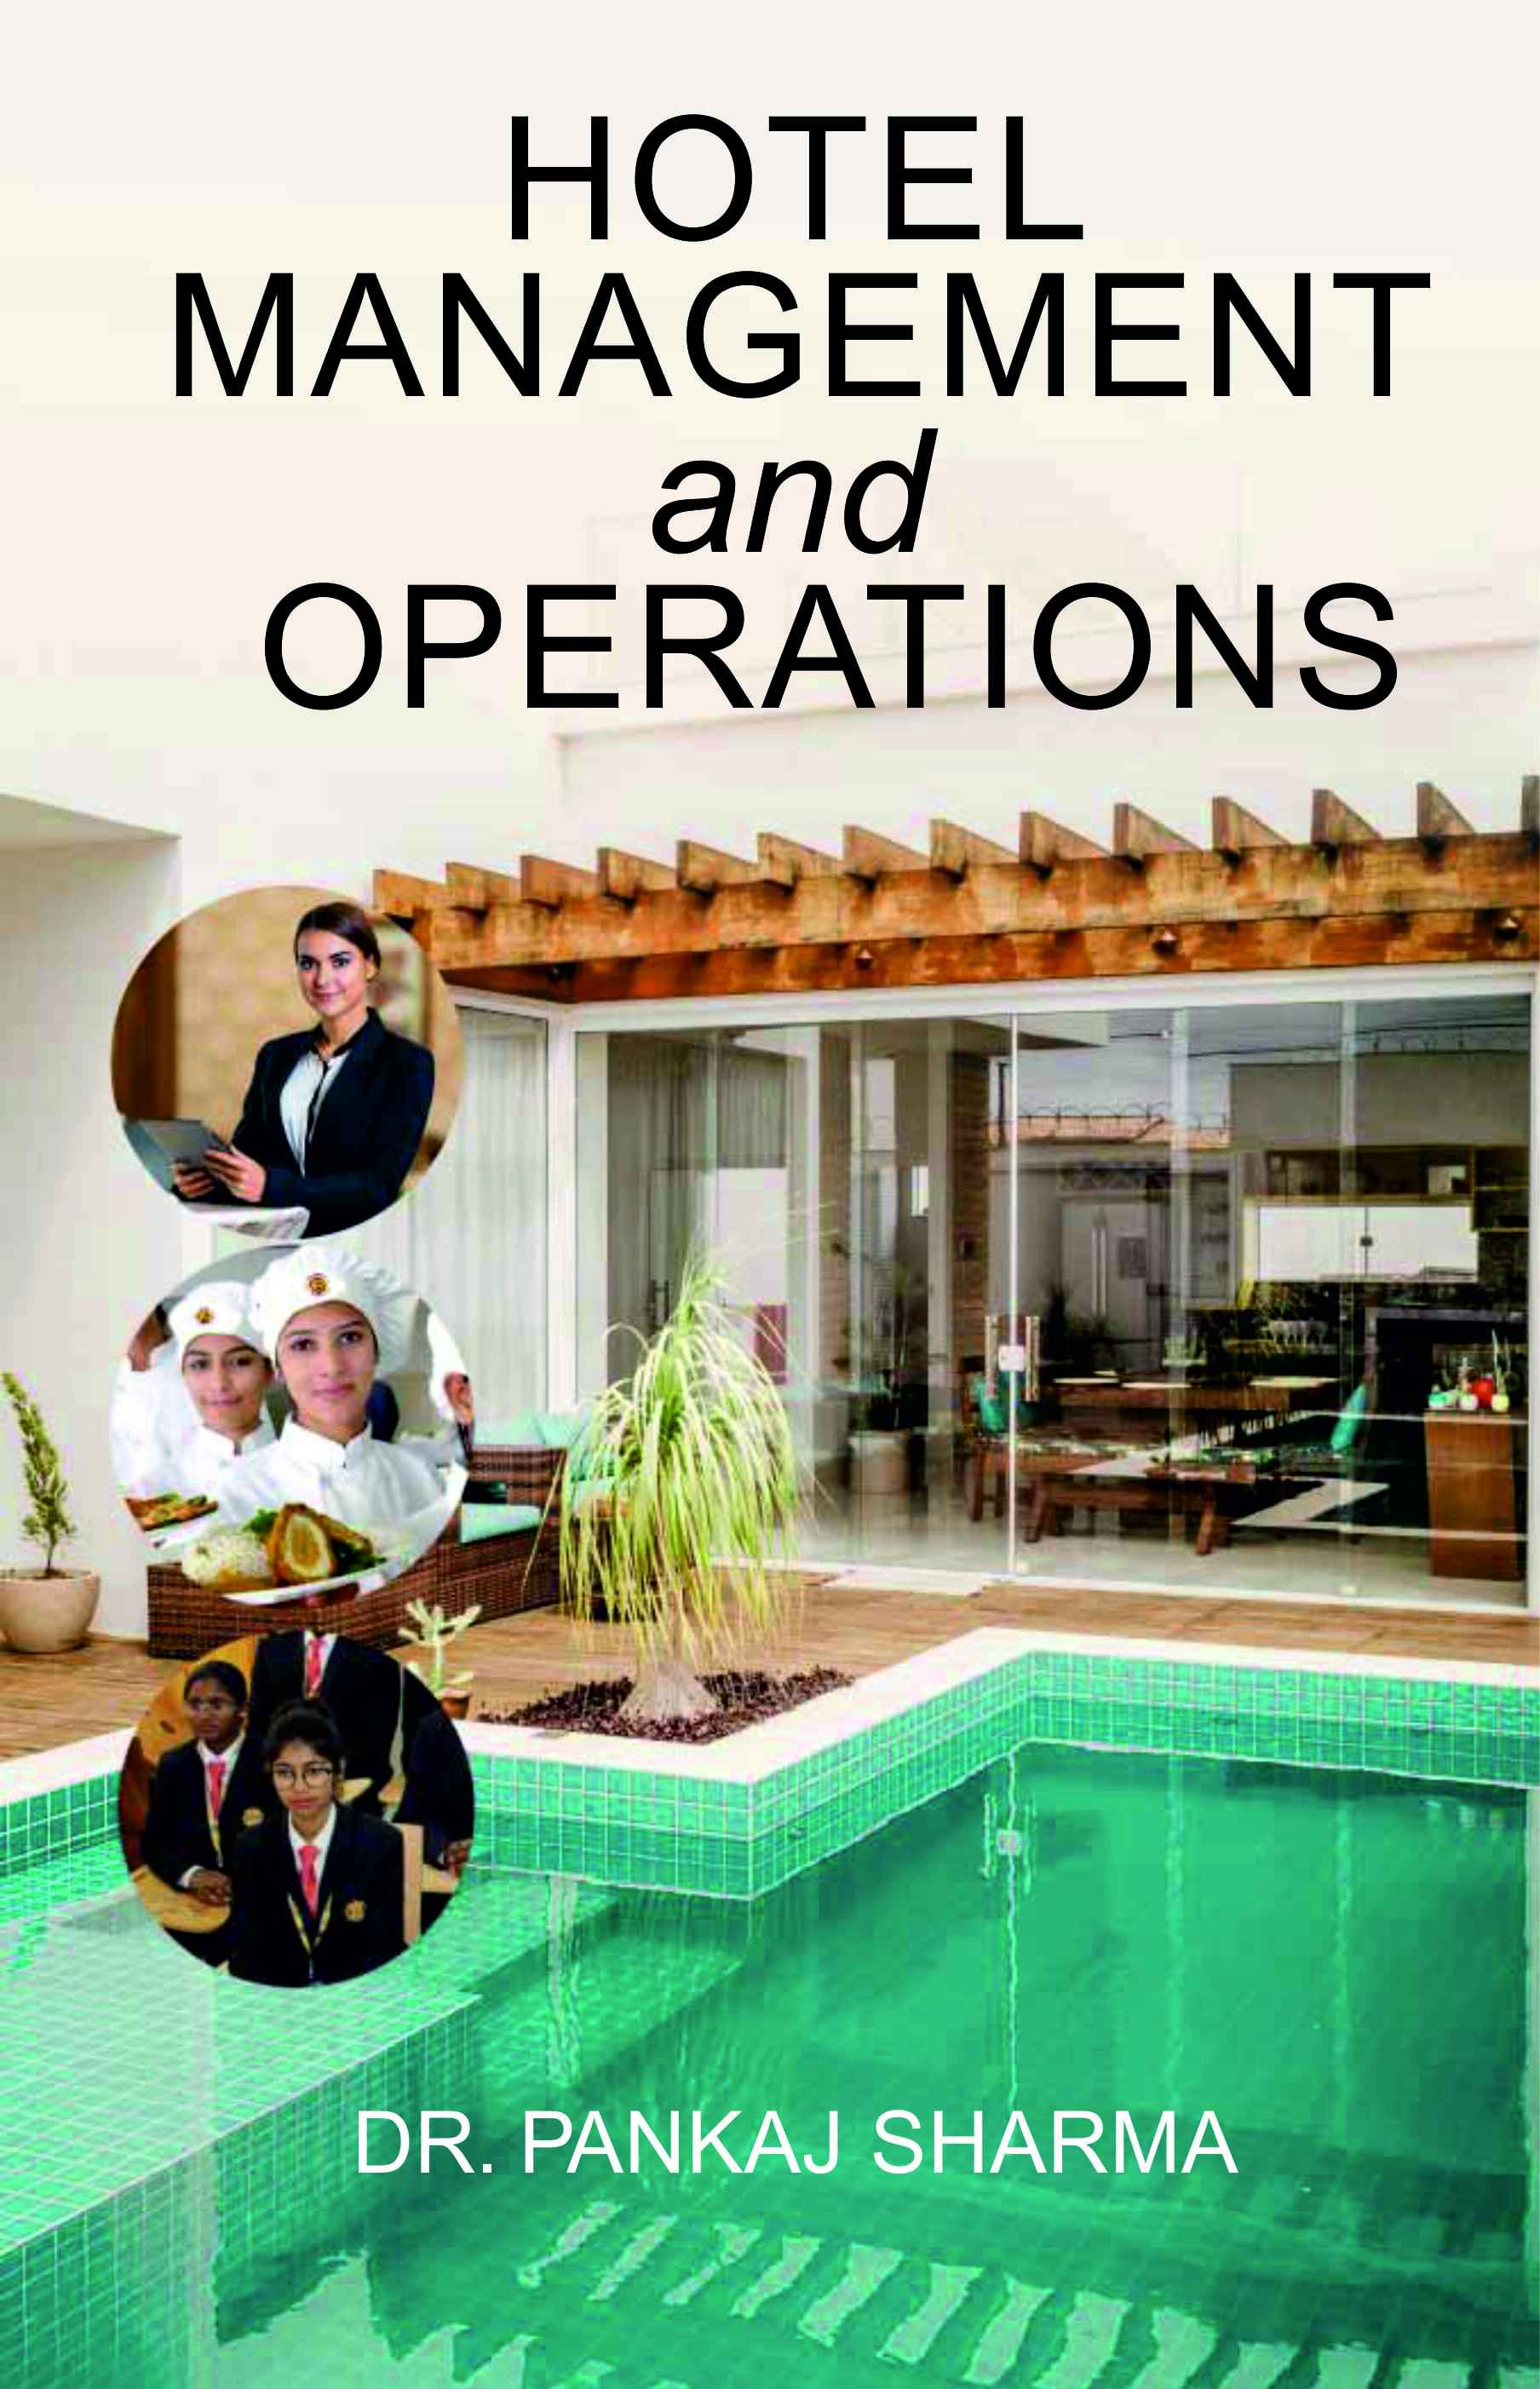 HOTEL MANAGEMENT and OPERATIONS